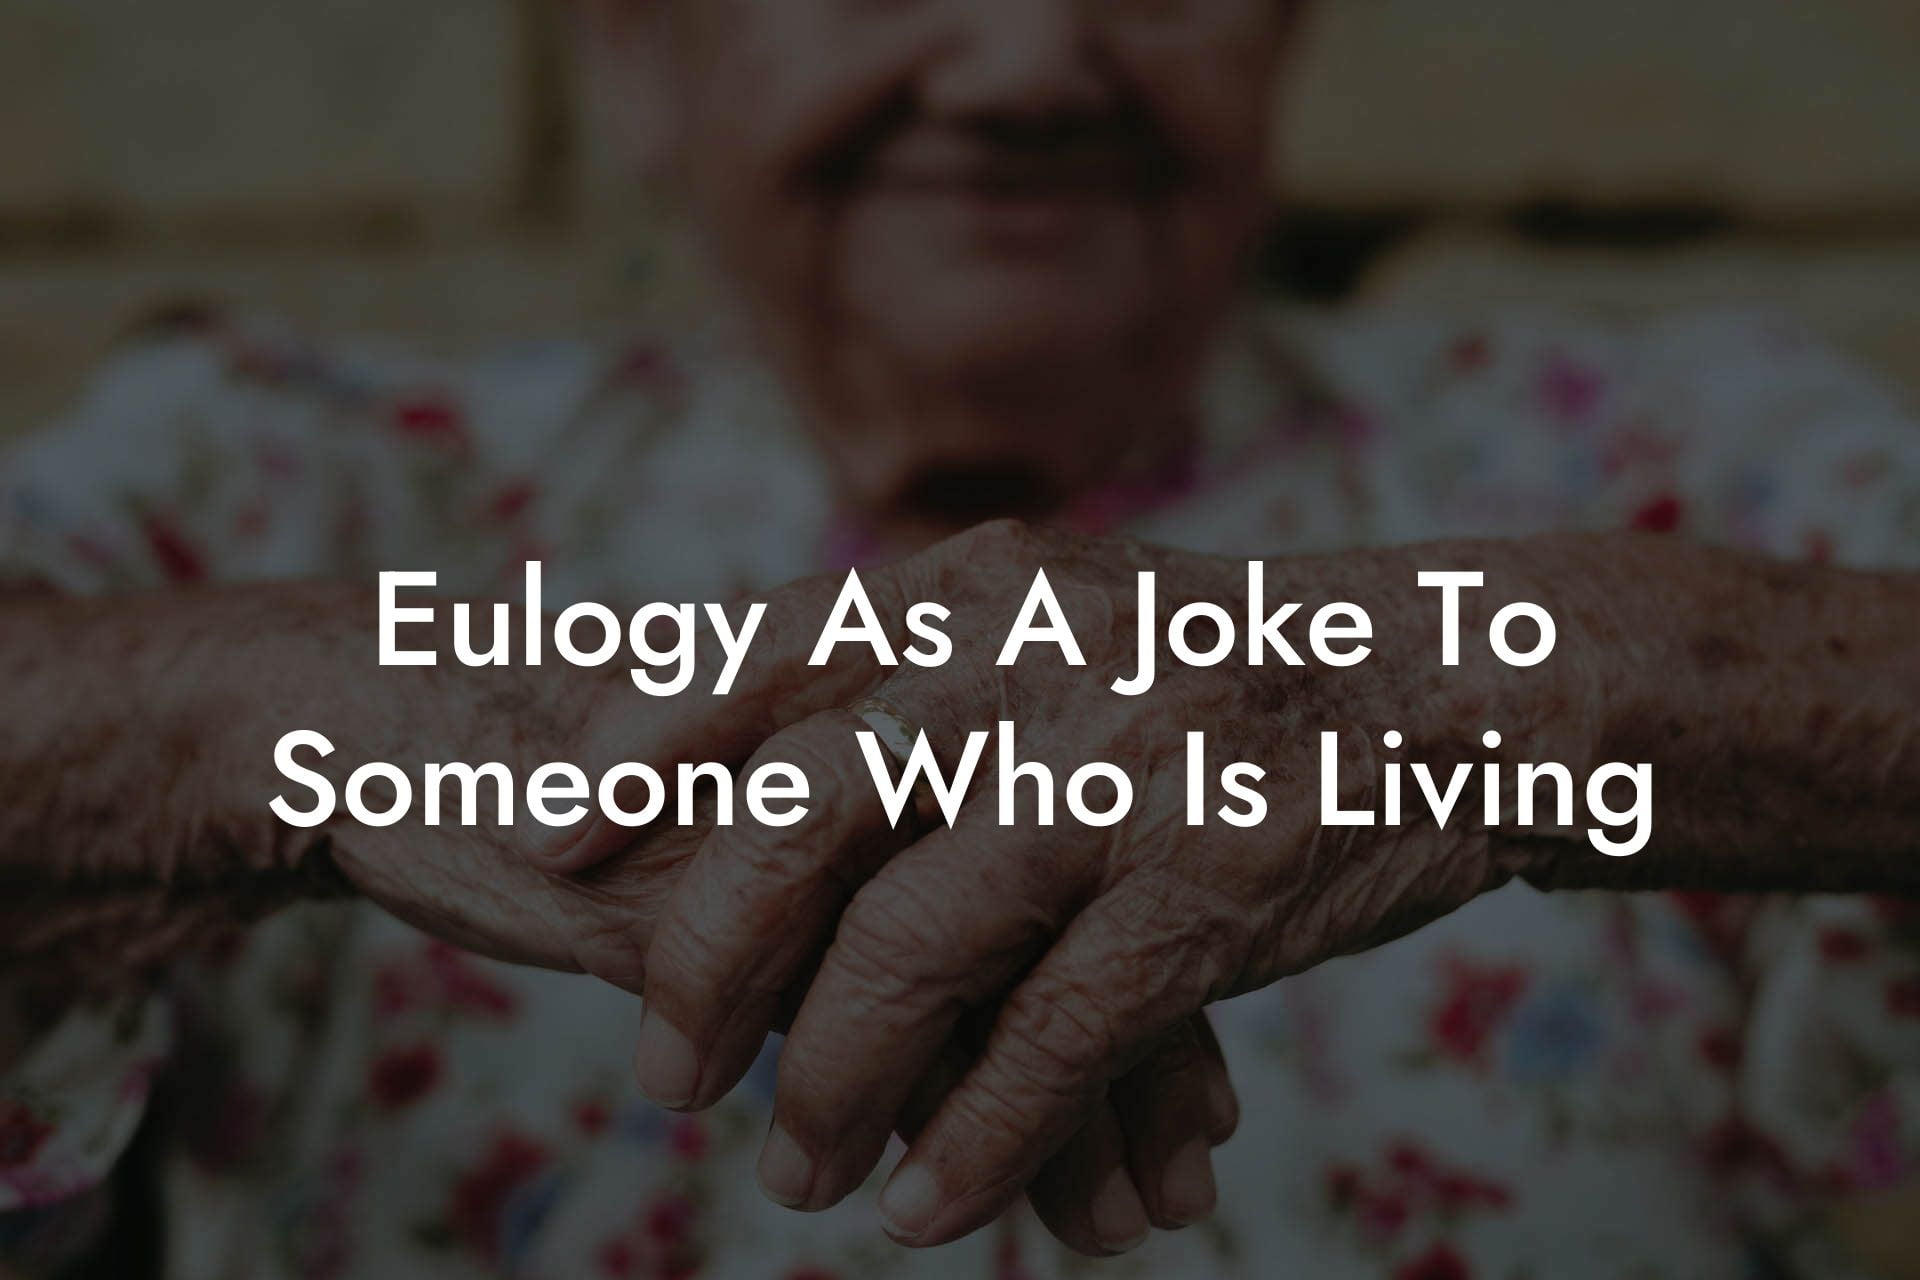 Eulogy As A Joke To Someone Who Is Living